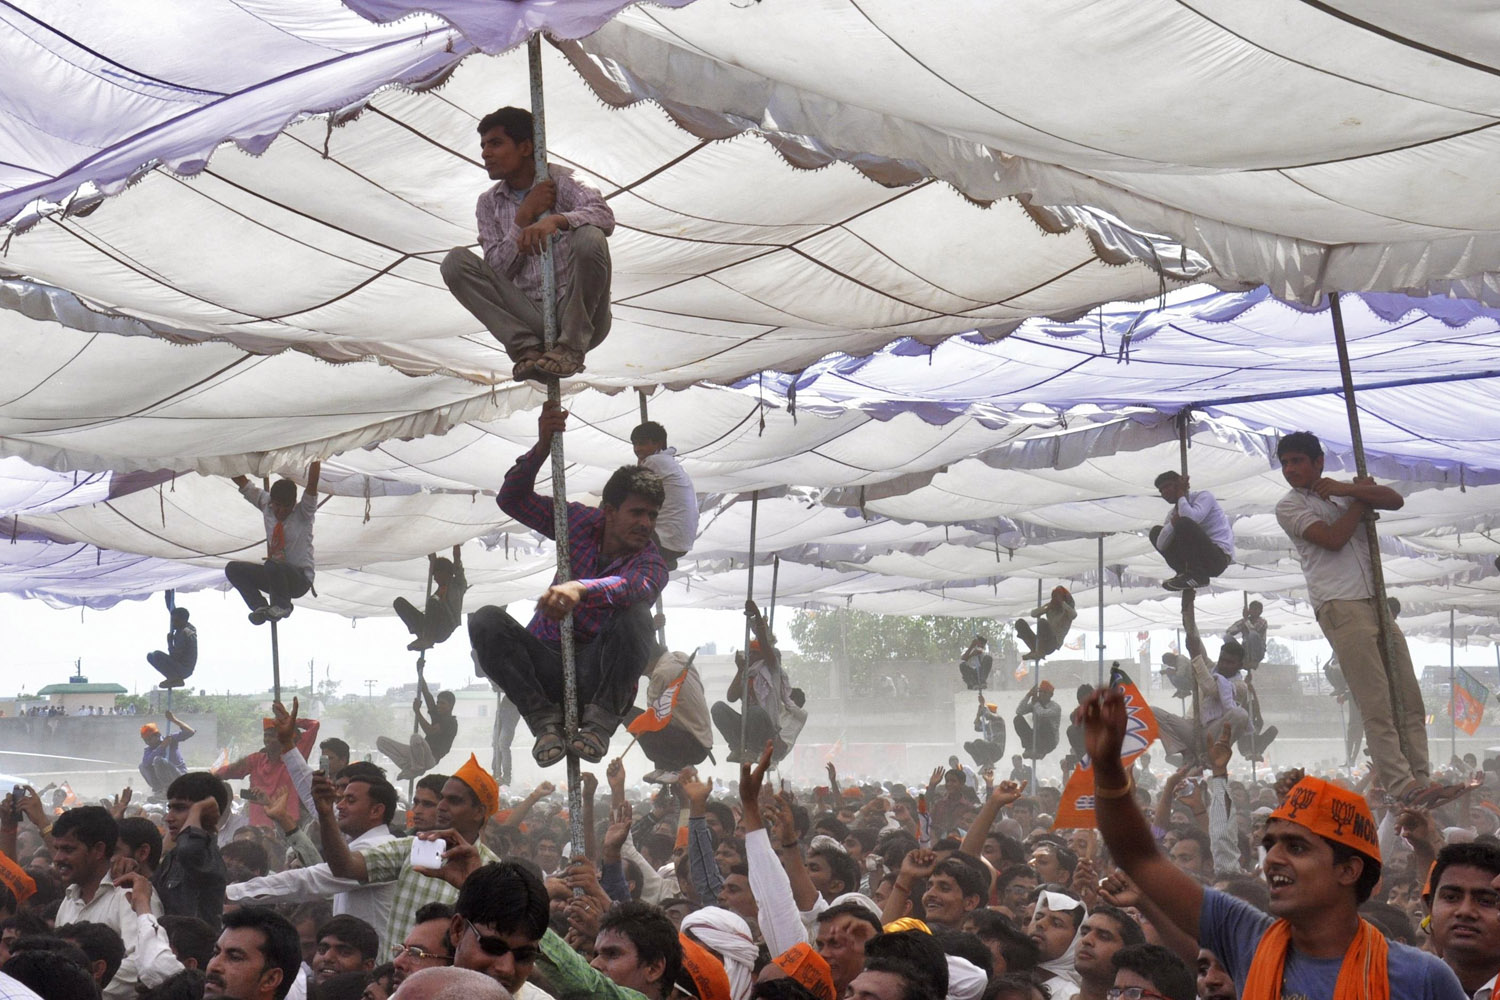 Supporters of Hindu nationalist Modi climb over the poles of a temporary tent to get a glimpse of Modi during an election campaign rally at Mathura